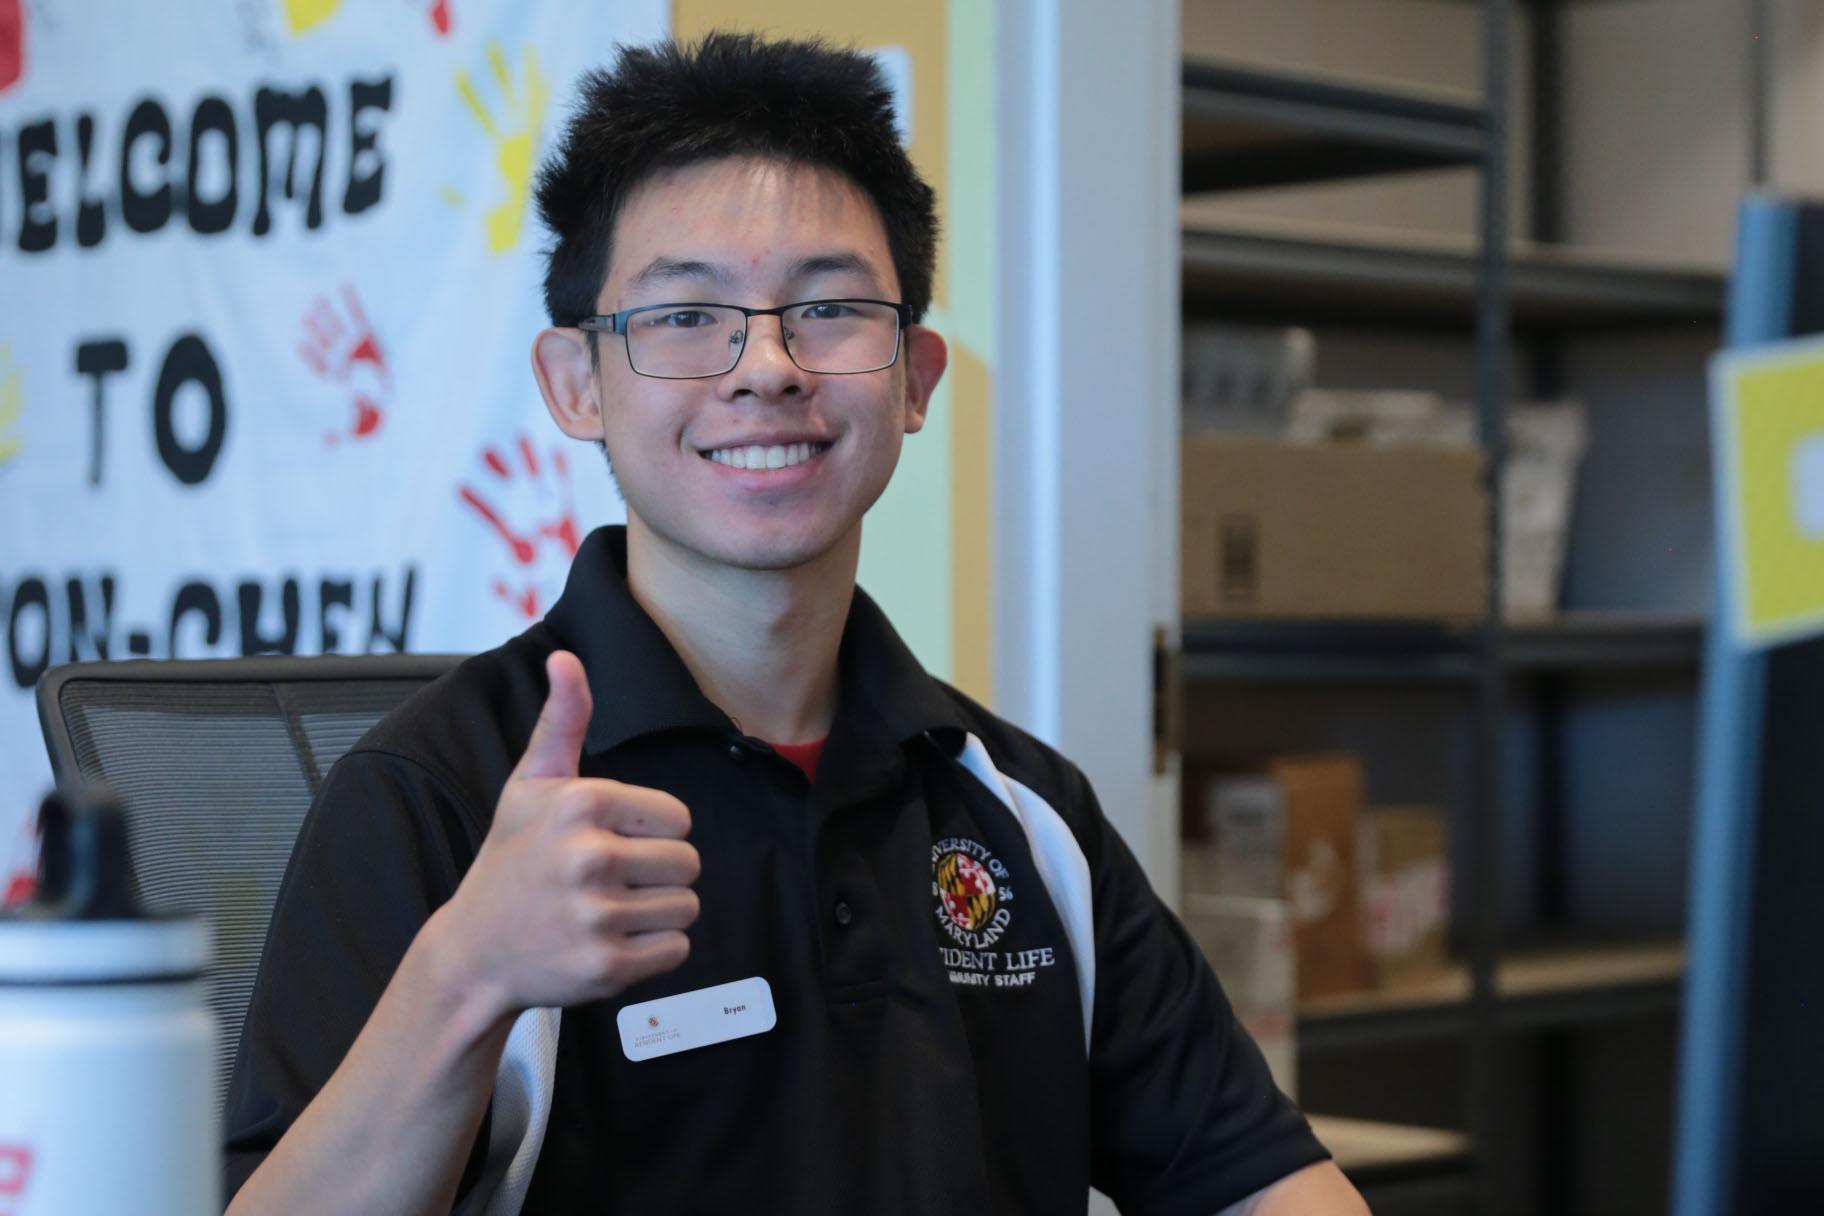 a smiling student employee behind a service desk wearing a black uniform shirt and giving the camera a thumbs up